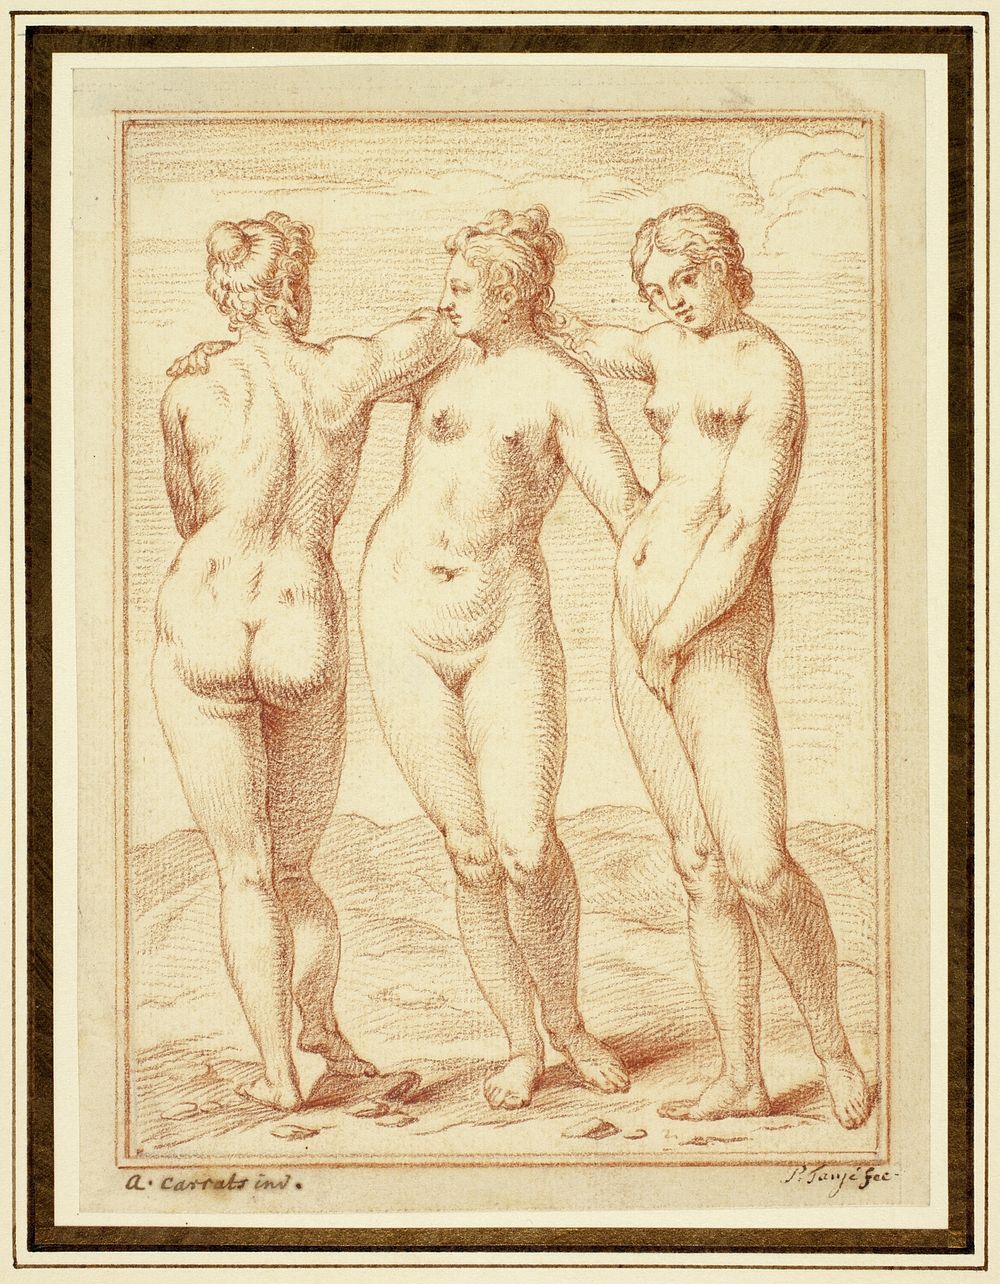 The Three Graces by Pieter Tanjé